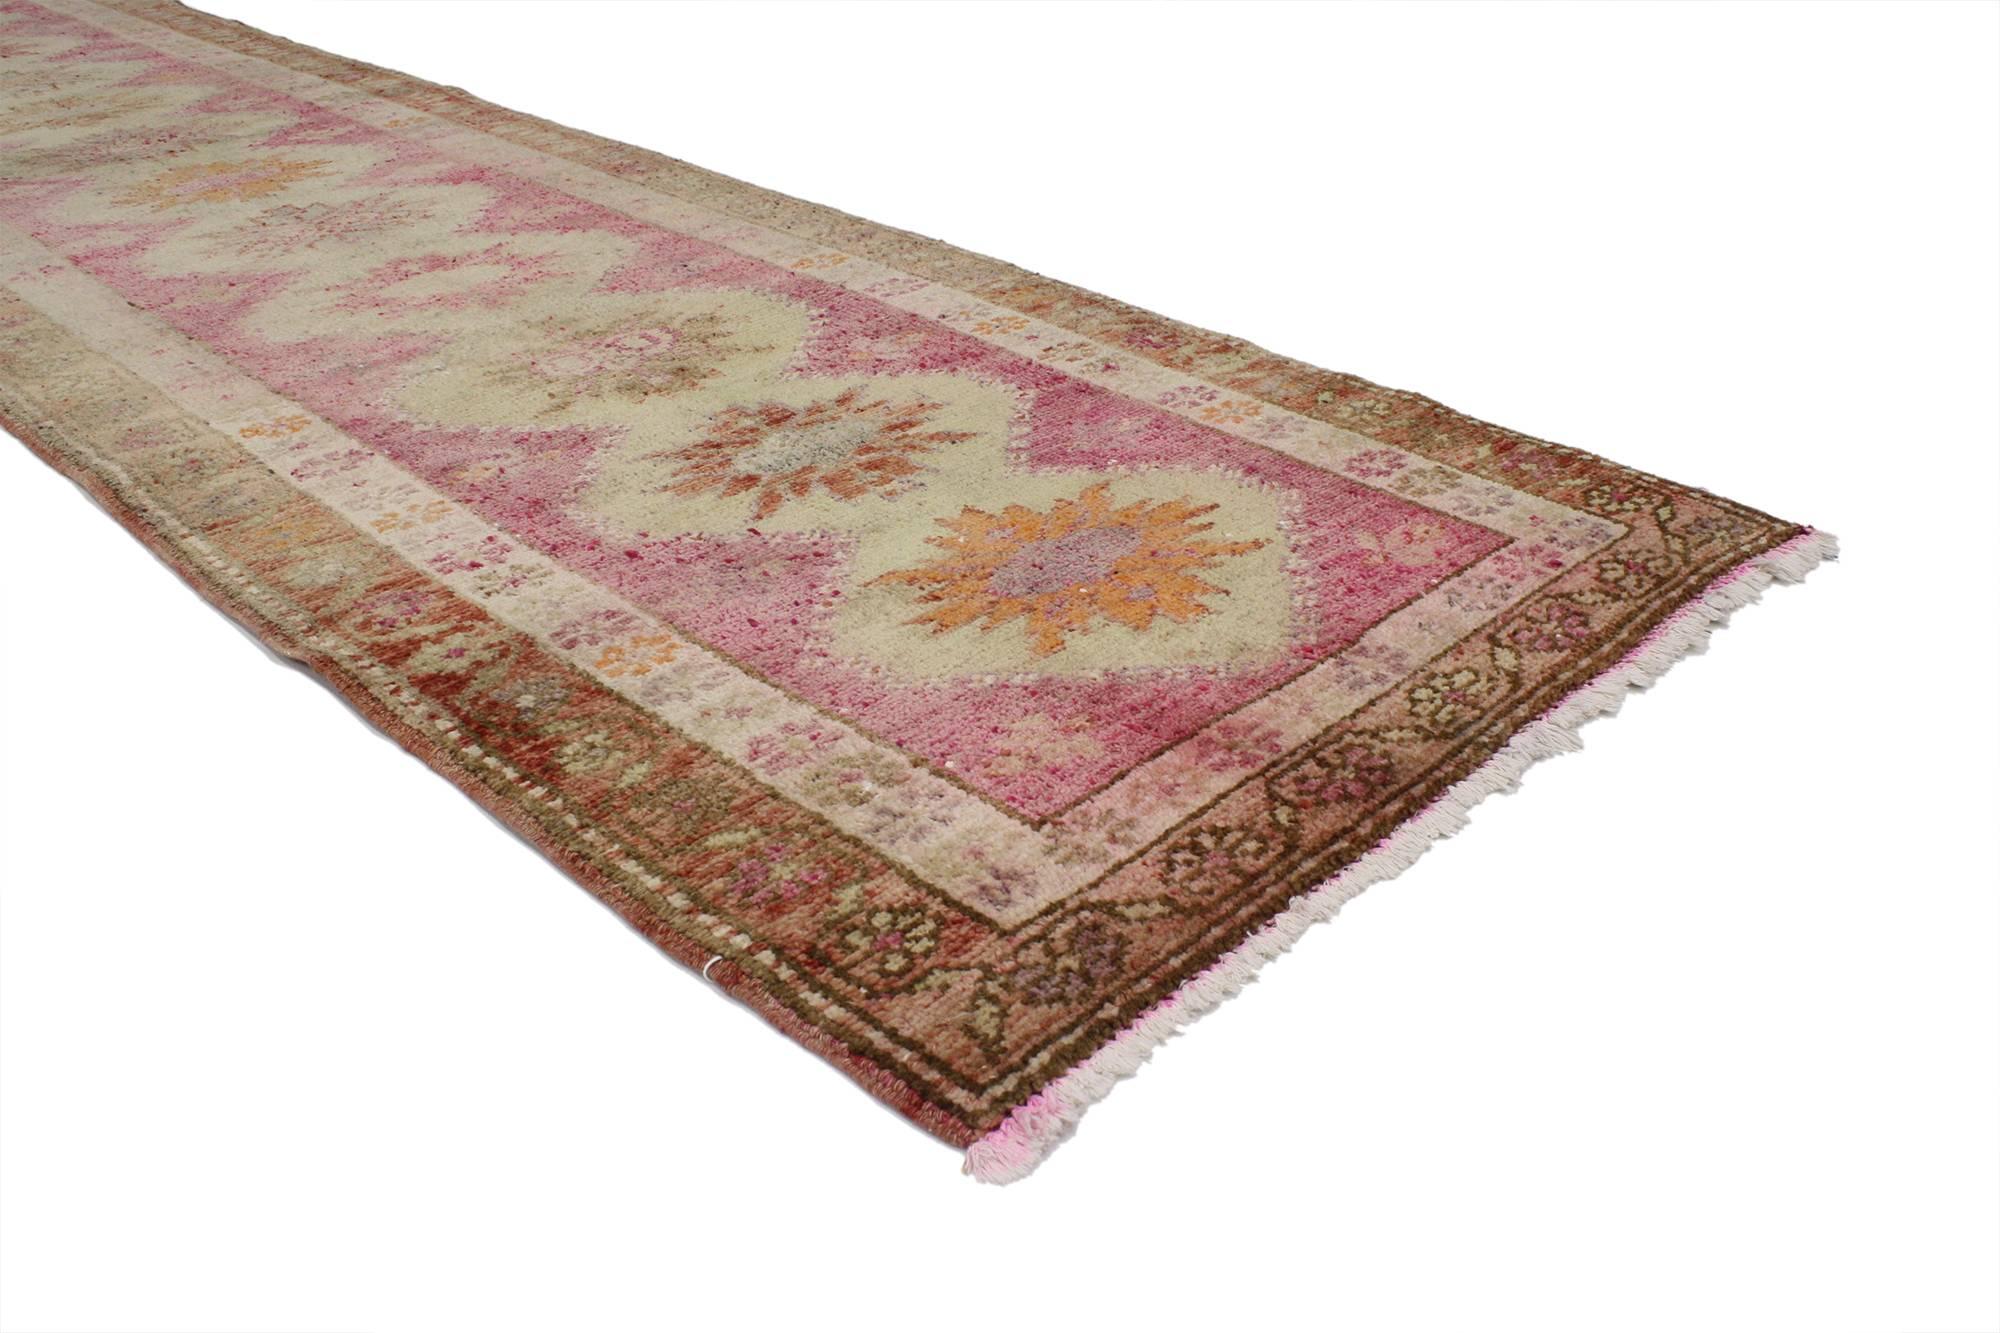 52061, vintage Turkish Oushak runner hallway runner. This hand-knotted wool vintage Turkish Oushak runner with tribal style features a geometric pattern of stacked medallions in an abrashed field flanked with stylized flowers. A double border